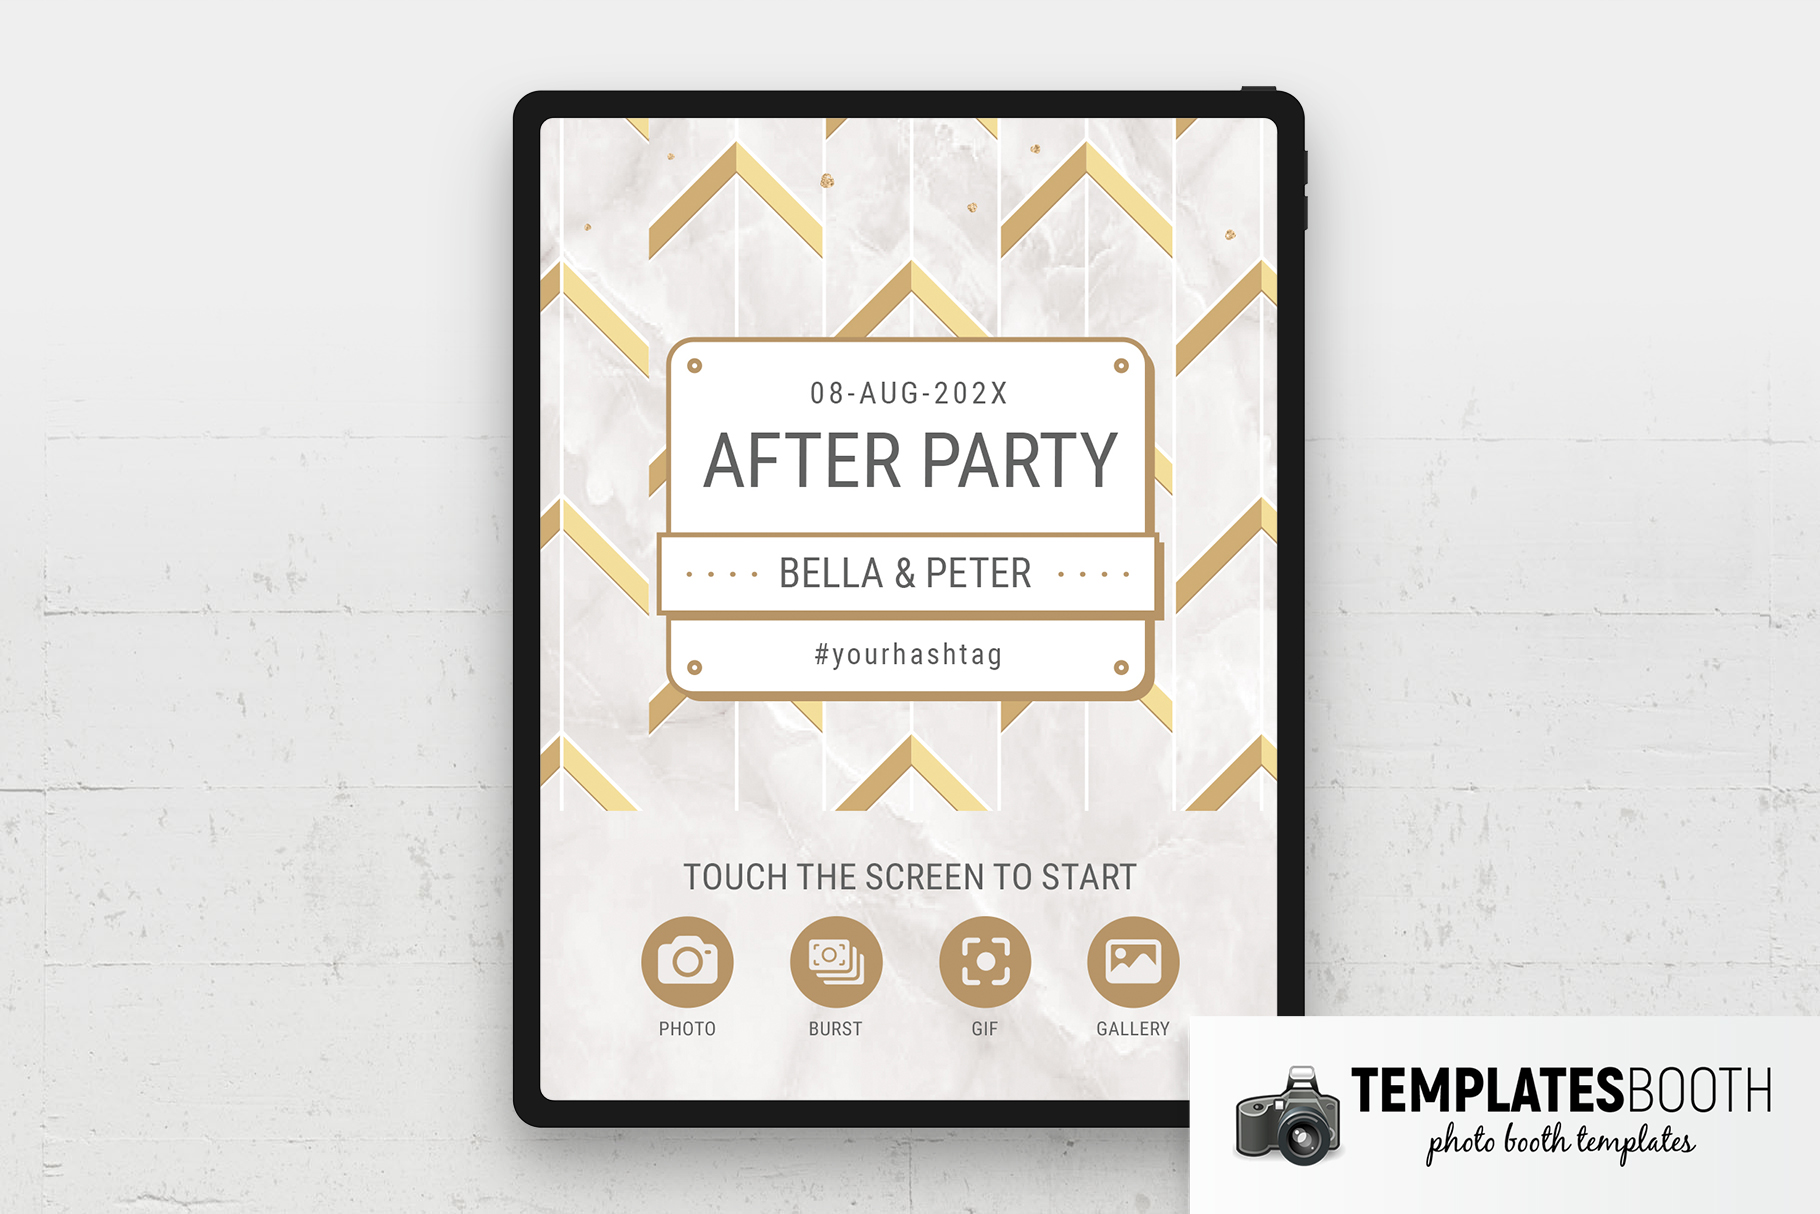 After Party Photo Booth Welcome Screen